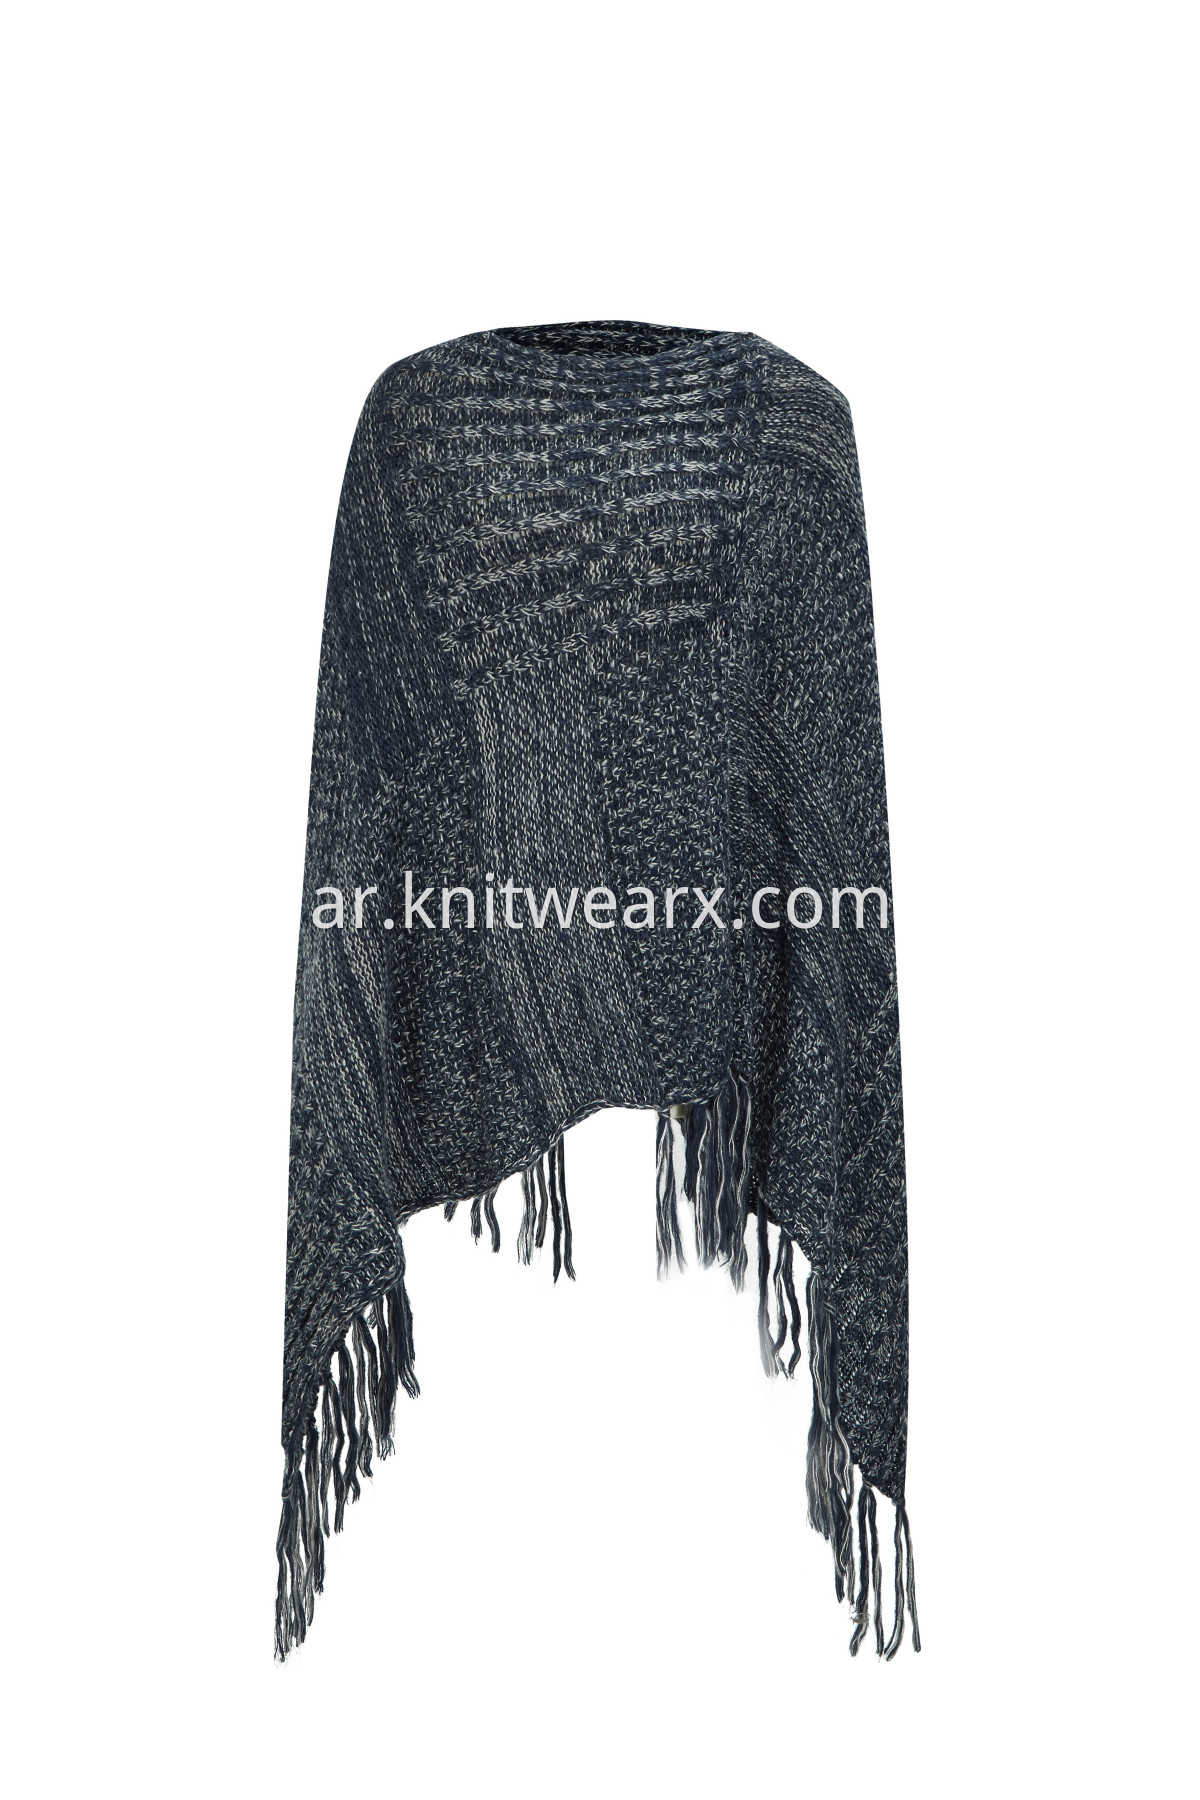 Women's Bohemian Shawl Poncho V-neck Knitted Sweater Cape